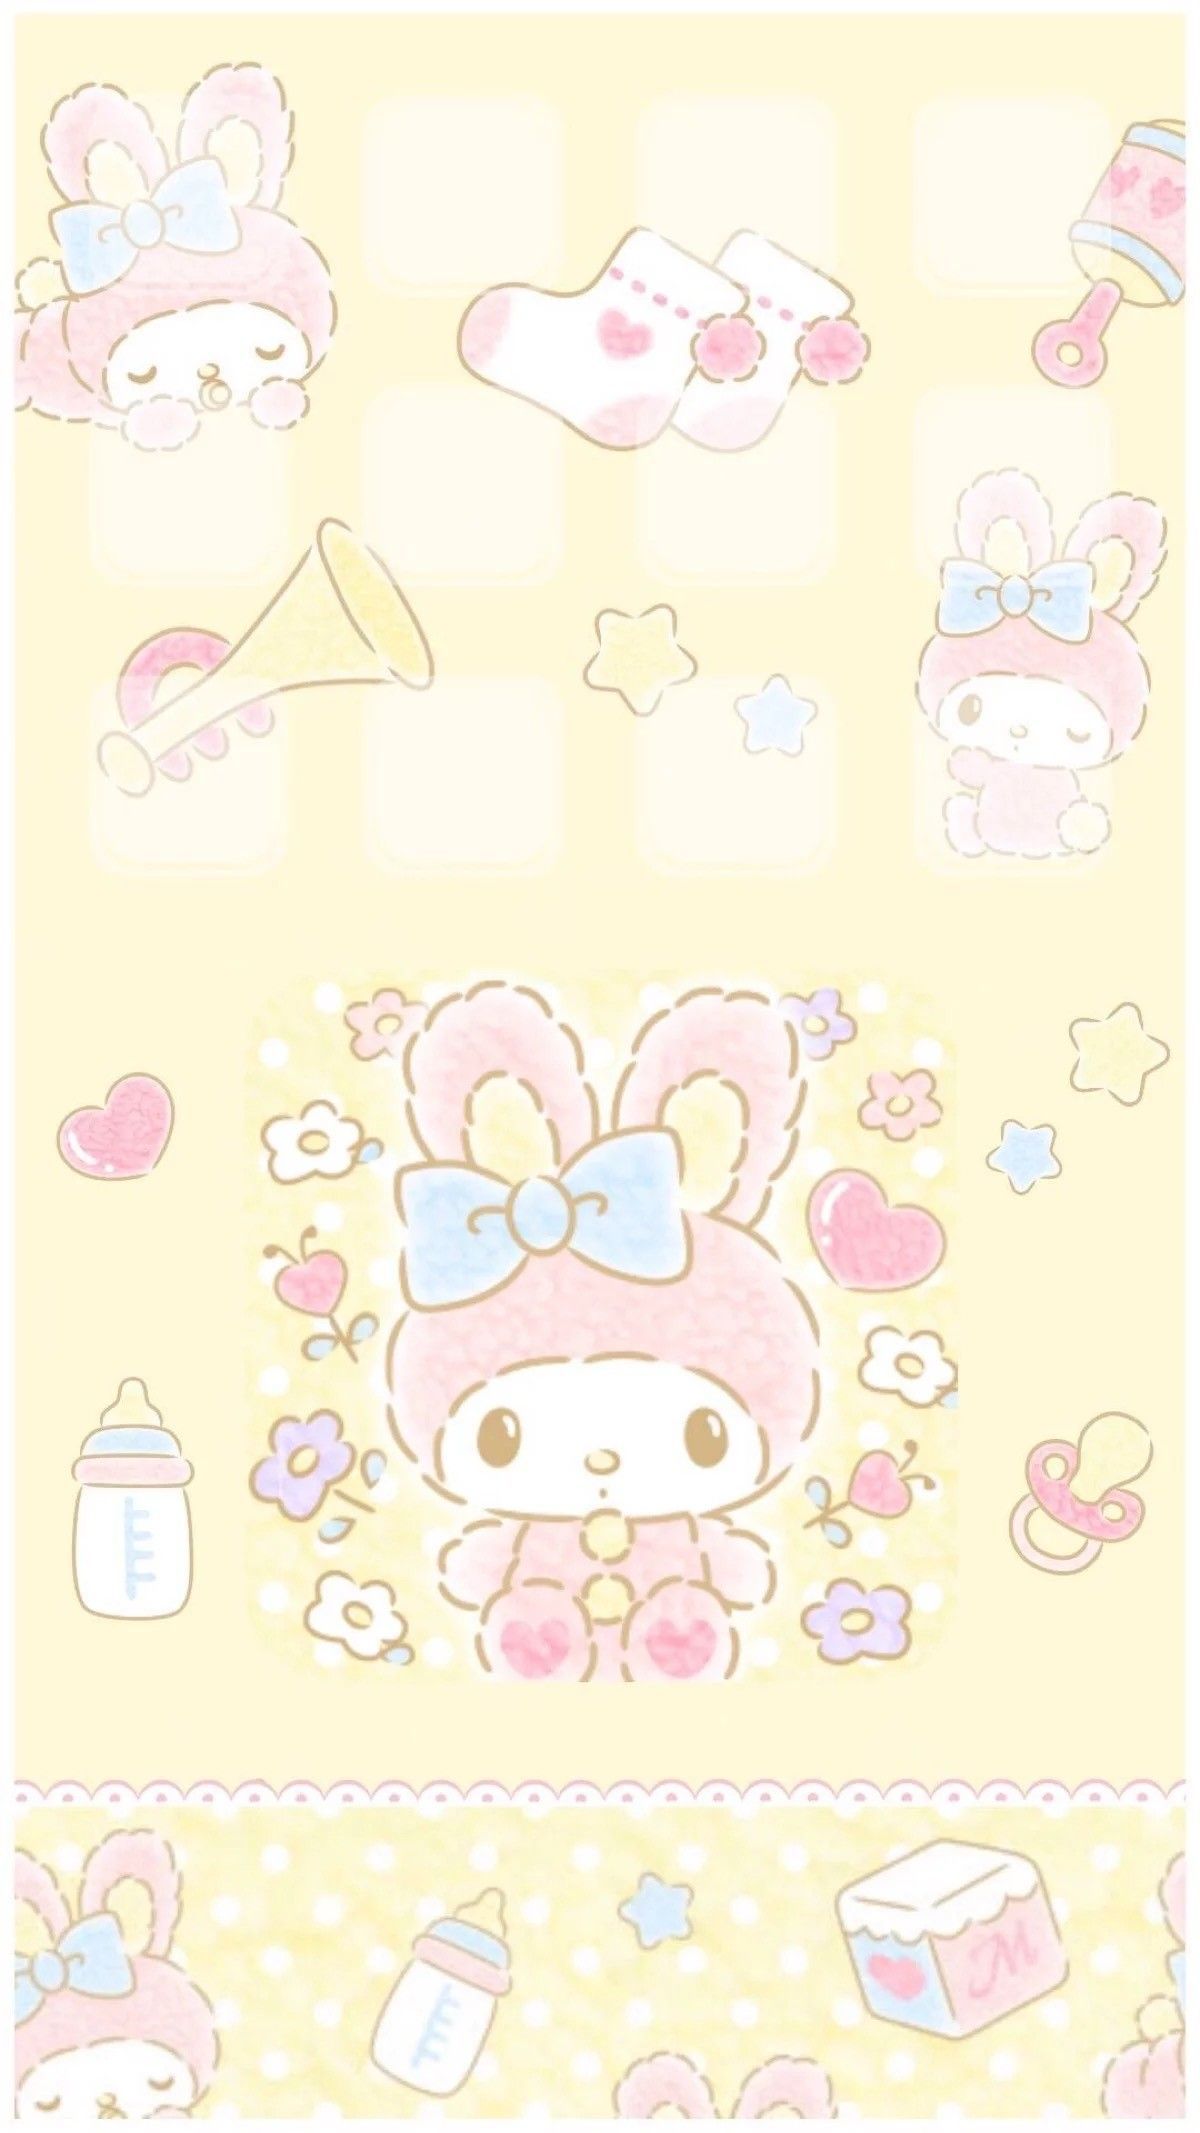 My Melody wallpaper for mobile devices! #MyMelody #Sanrio - Sanrio